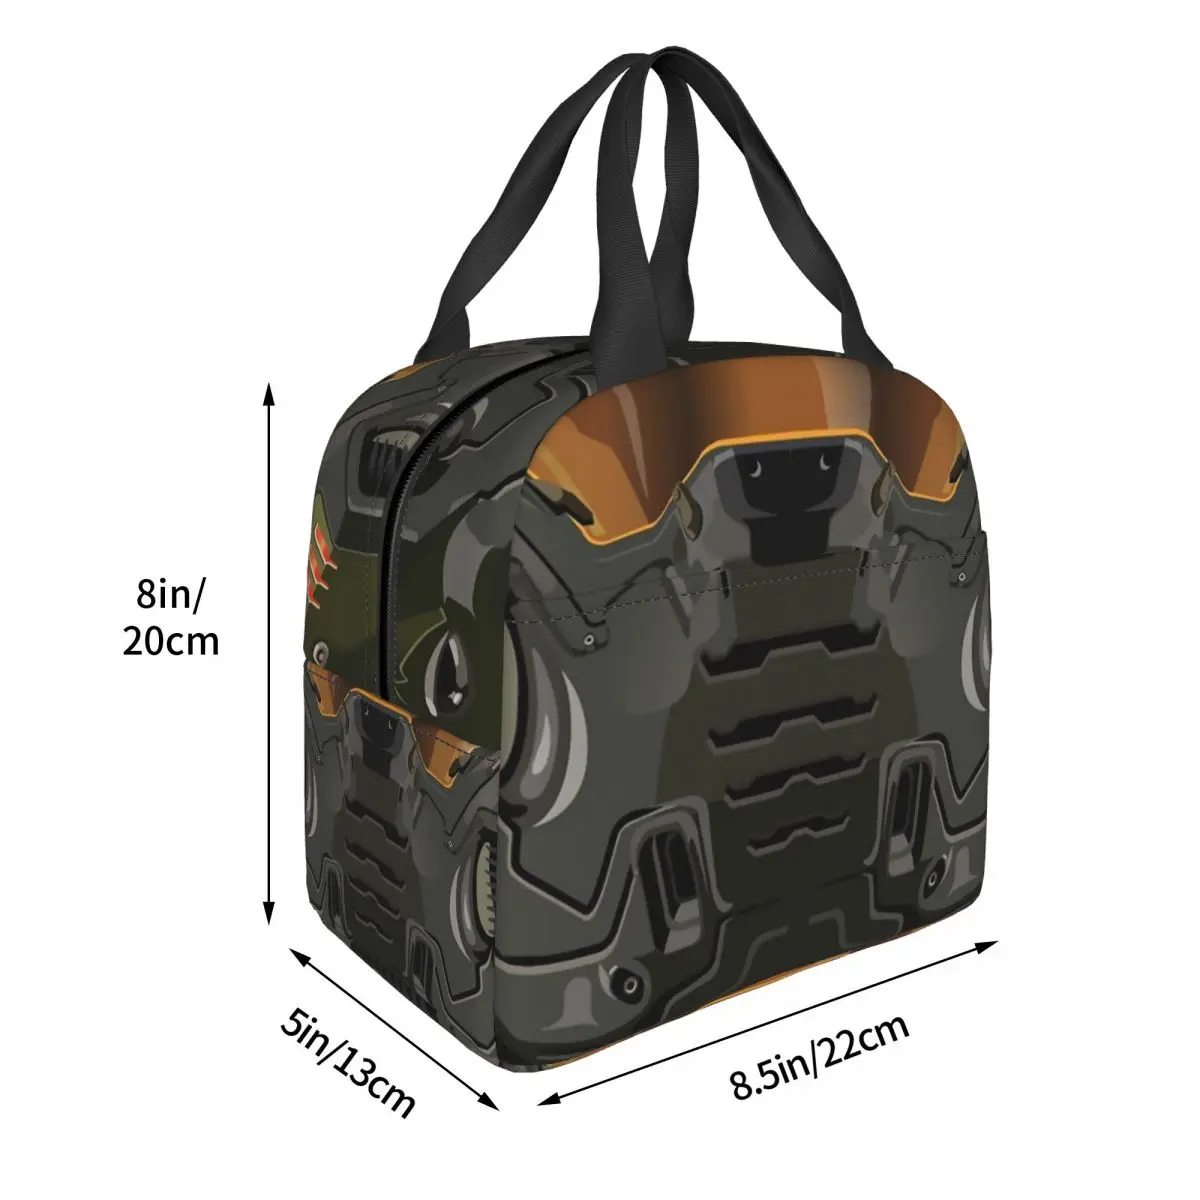 DOOM Slayer Helmet Insulated Lunch Bag Thermal Bag Reusable Pilot Air Fighter High Capacity Tote Lunch Box Food Handbags Beach images - 6